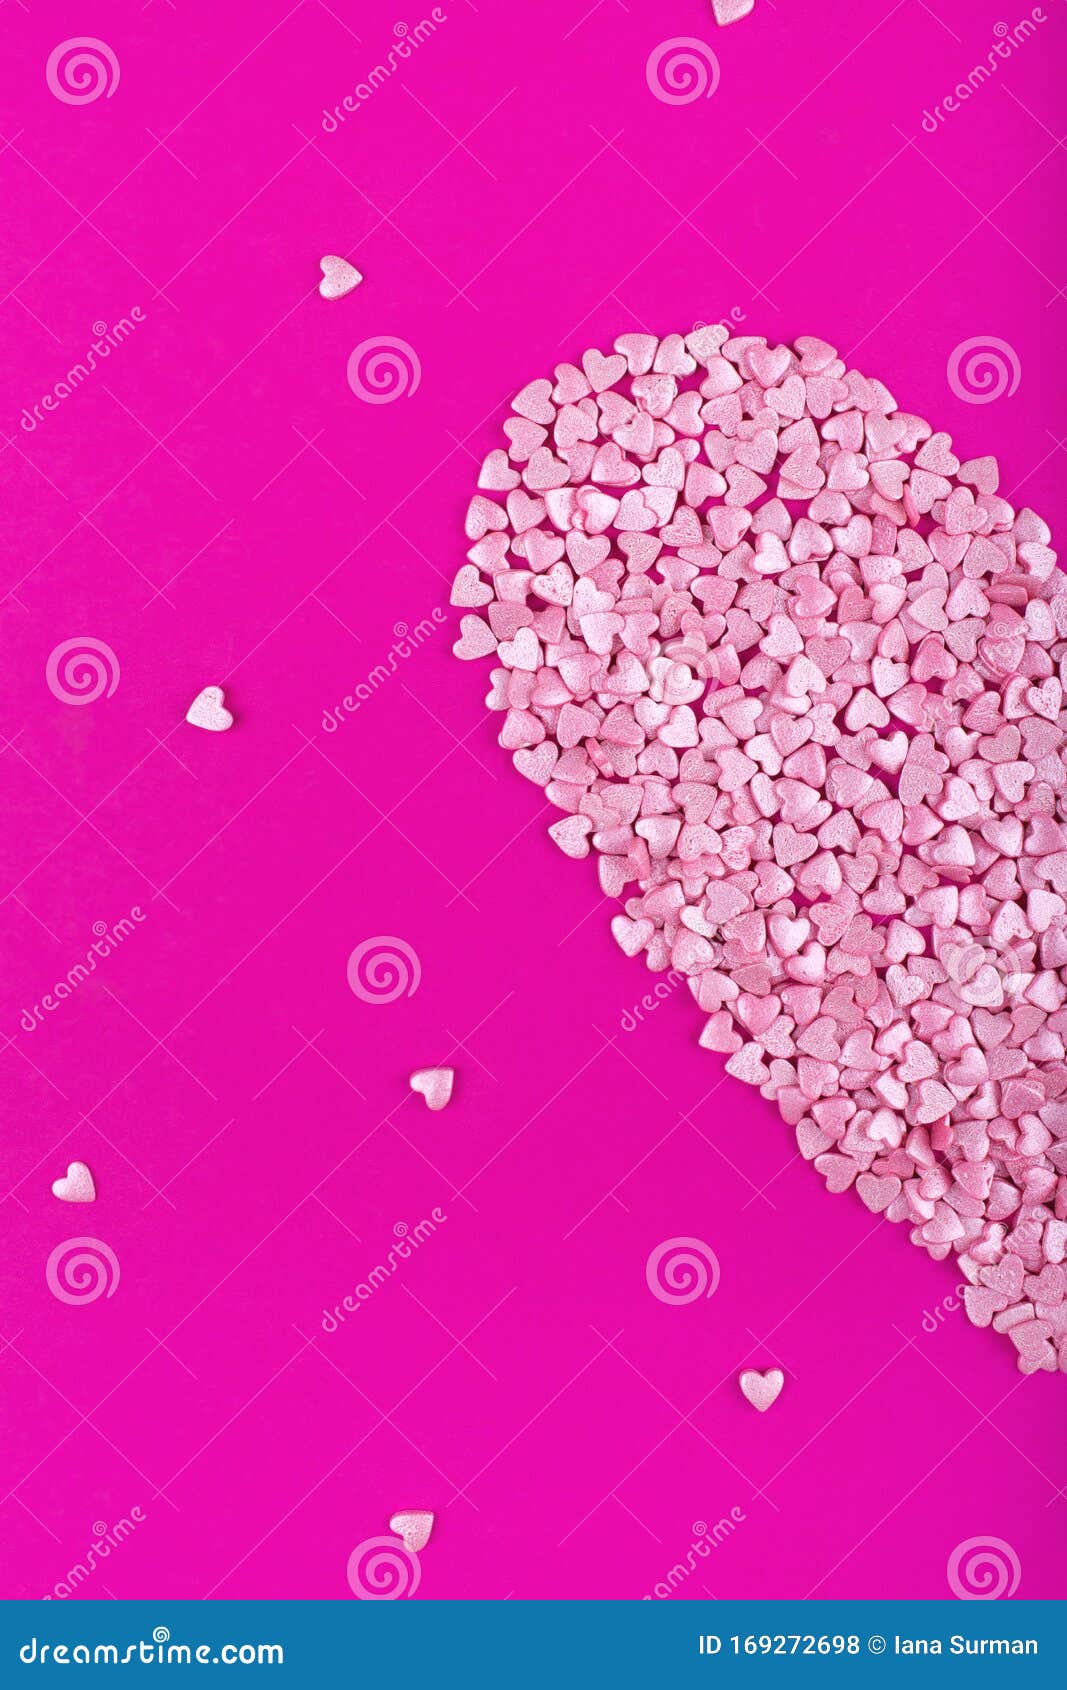 Half Heart Stock Photos and Images  123RF